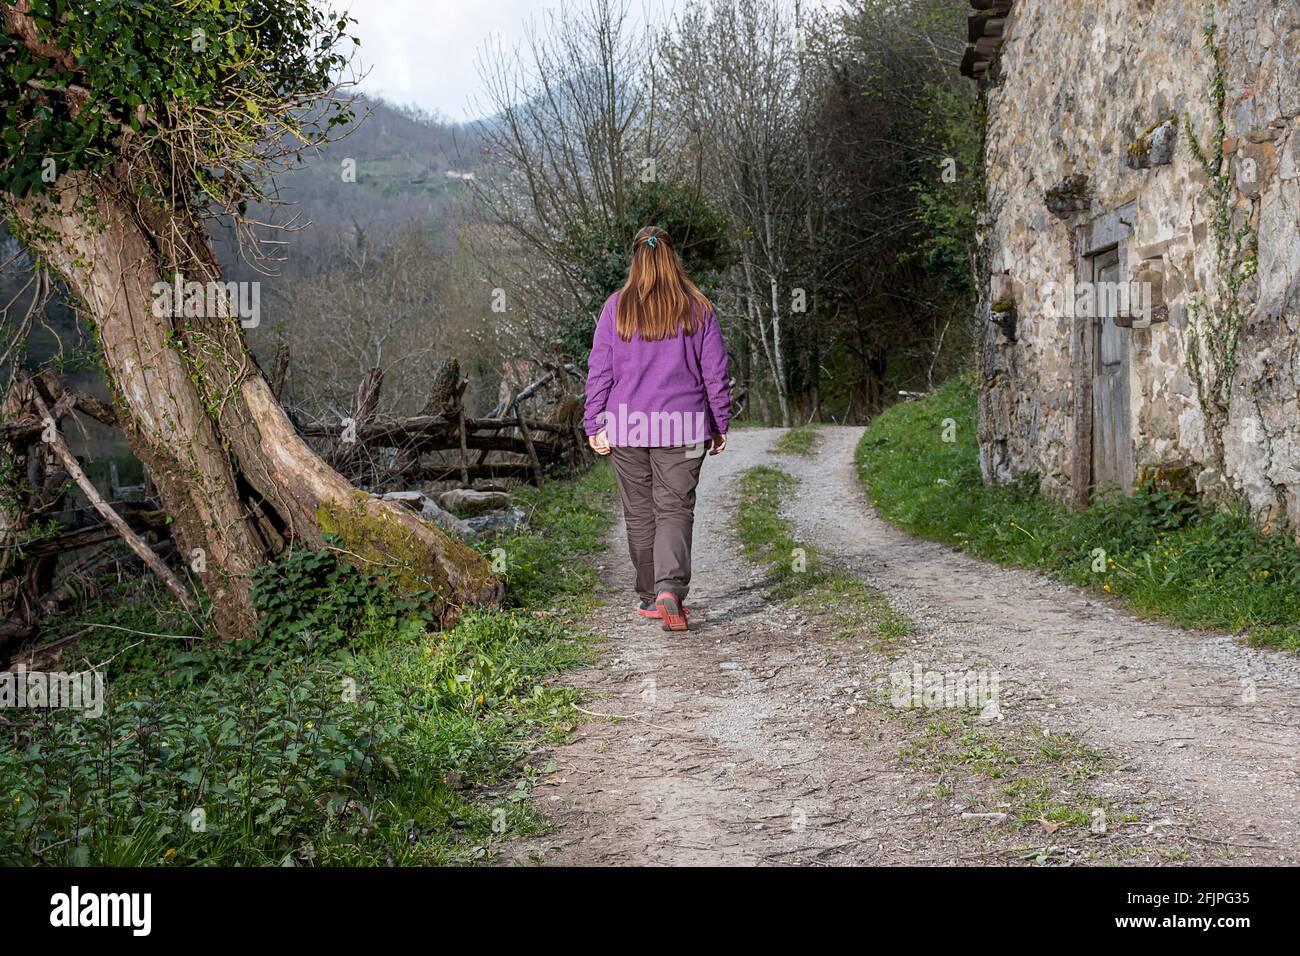 Girl walking on a path located in a council of Asturias, Spain.The photograph is taken on a cloudy day and is made in Horizontal format. Stock Photo